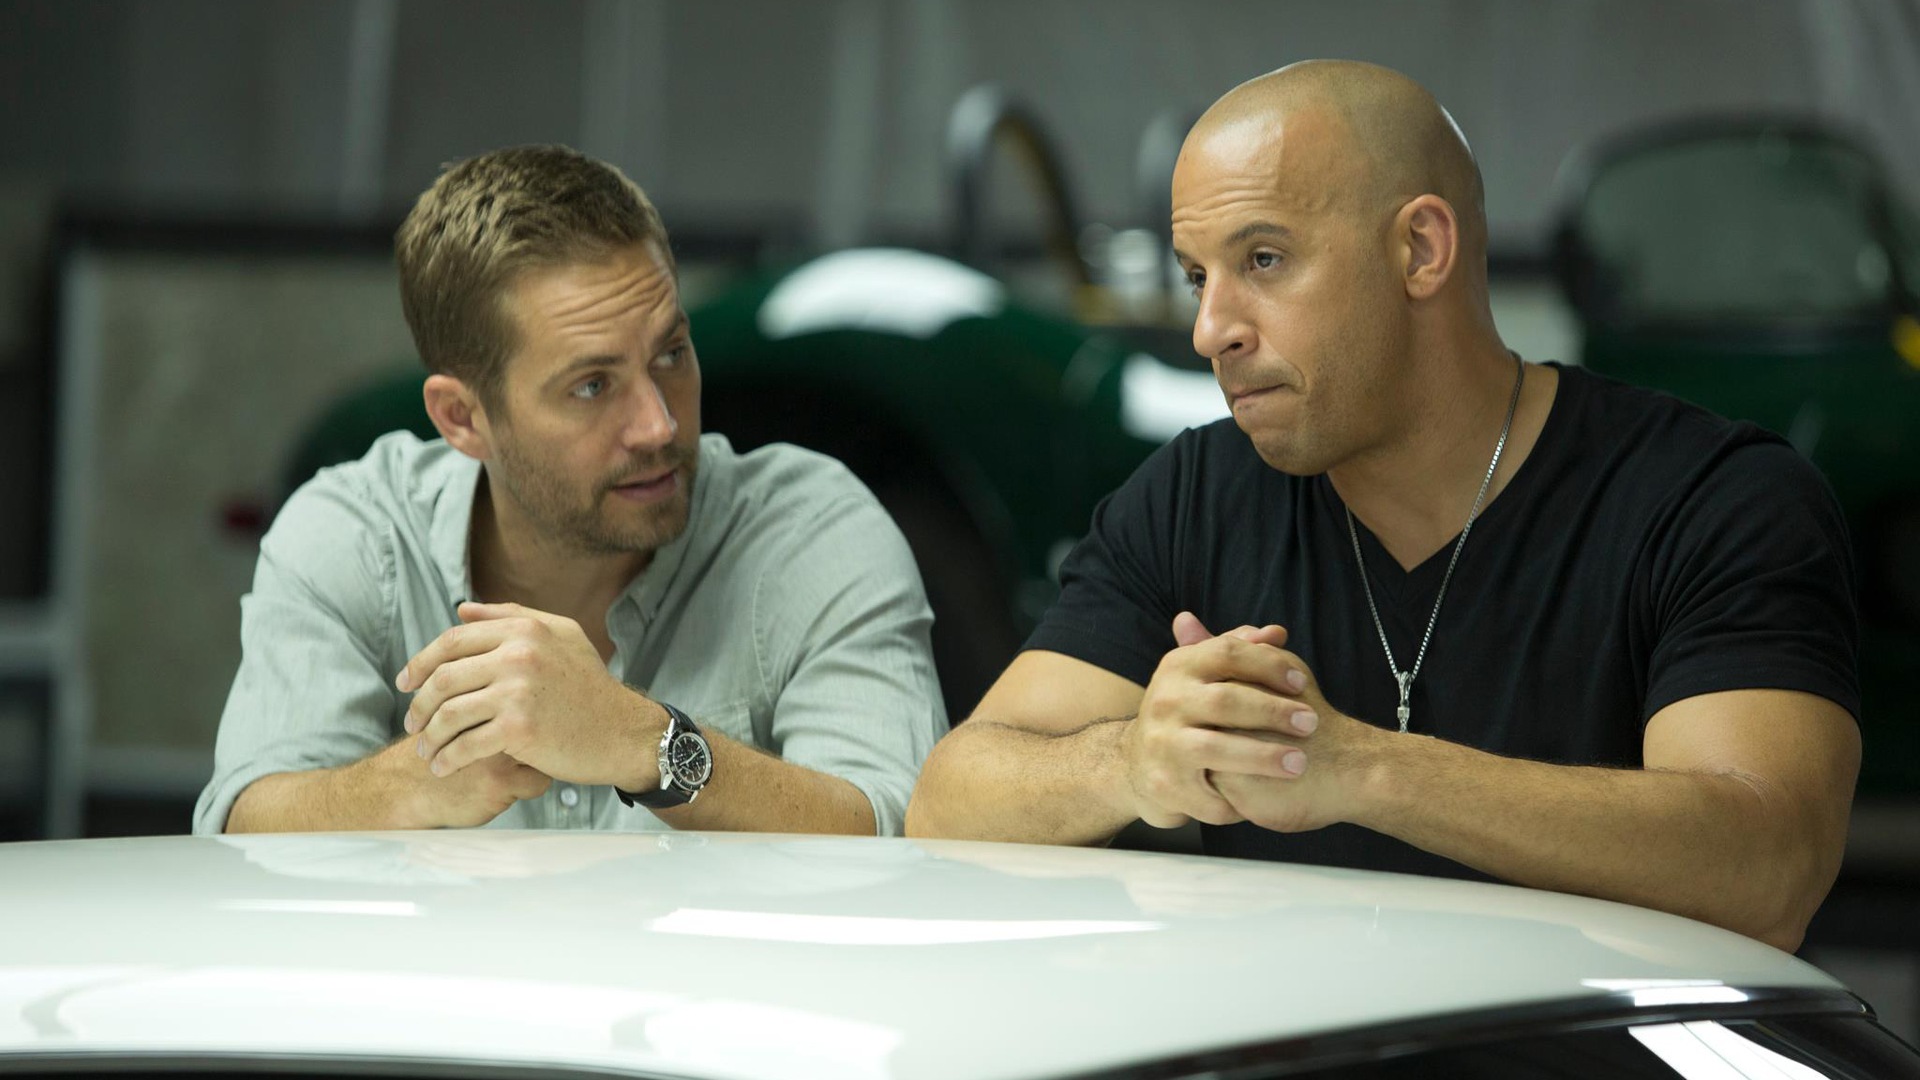 Fast And Furious 6 HD movie wallpapers #8 - 1920x1080